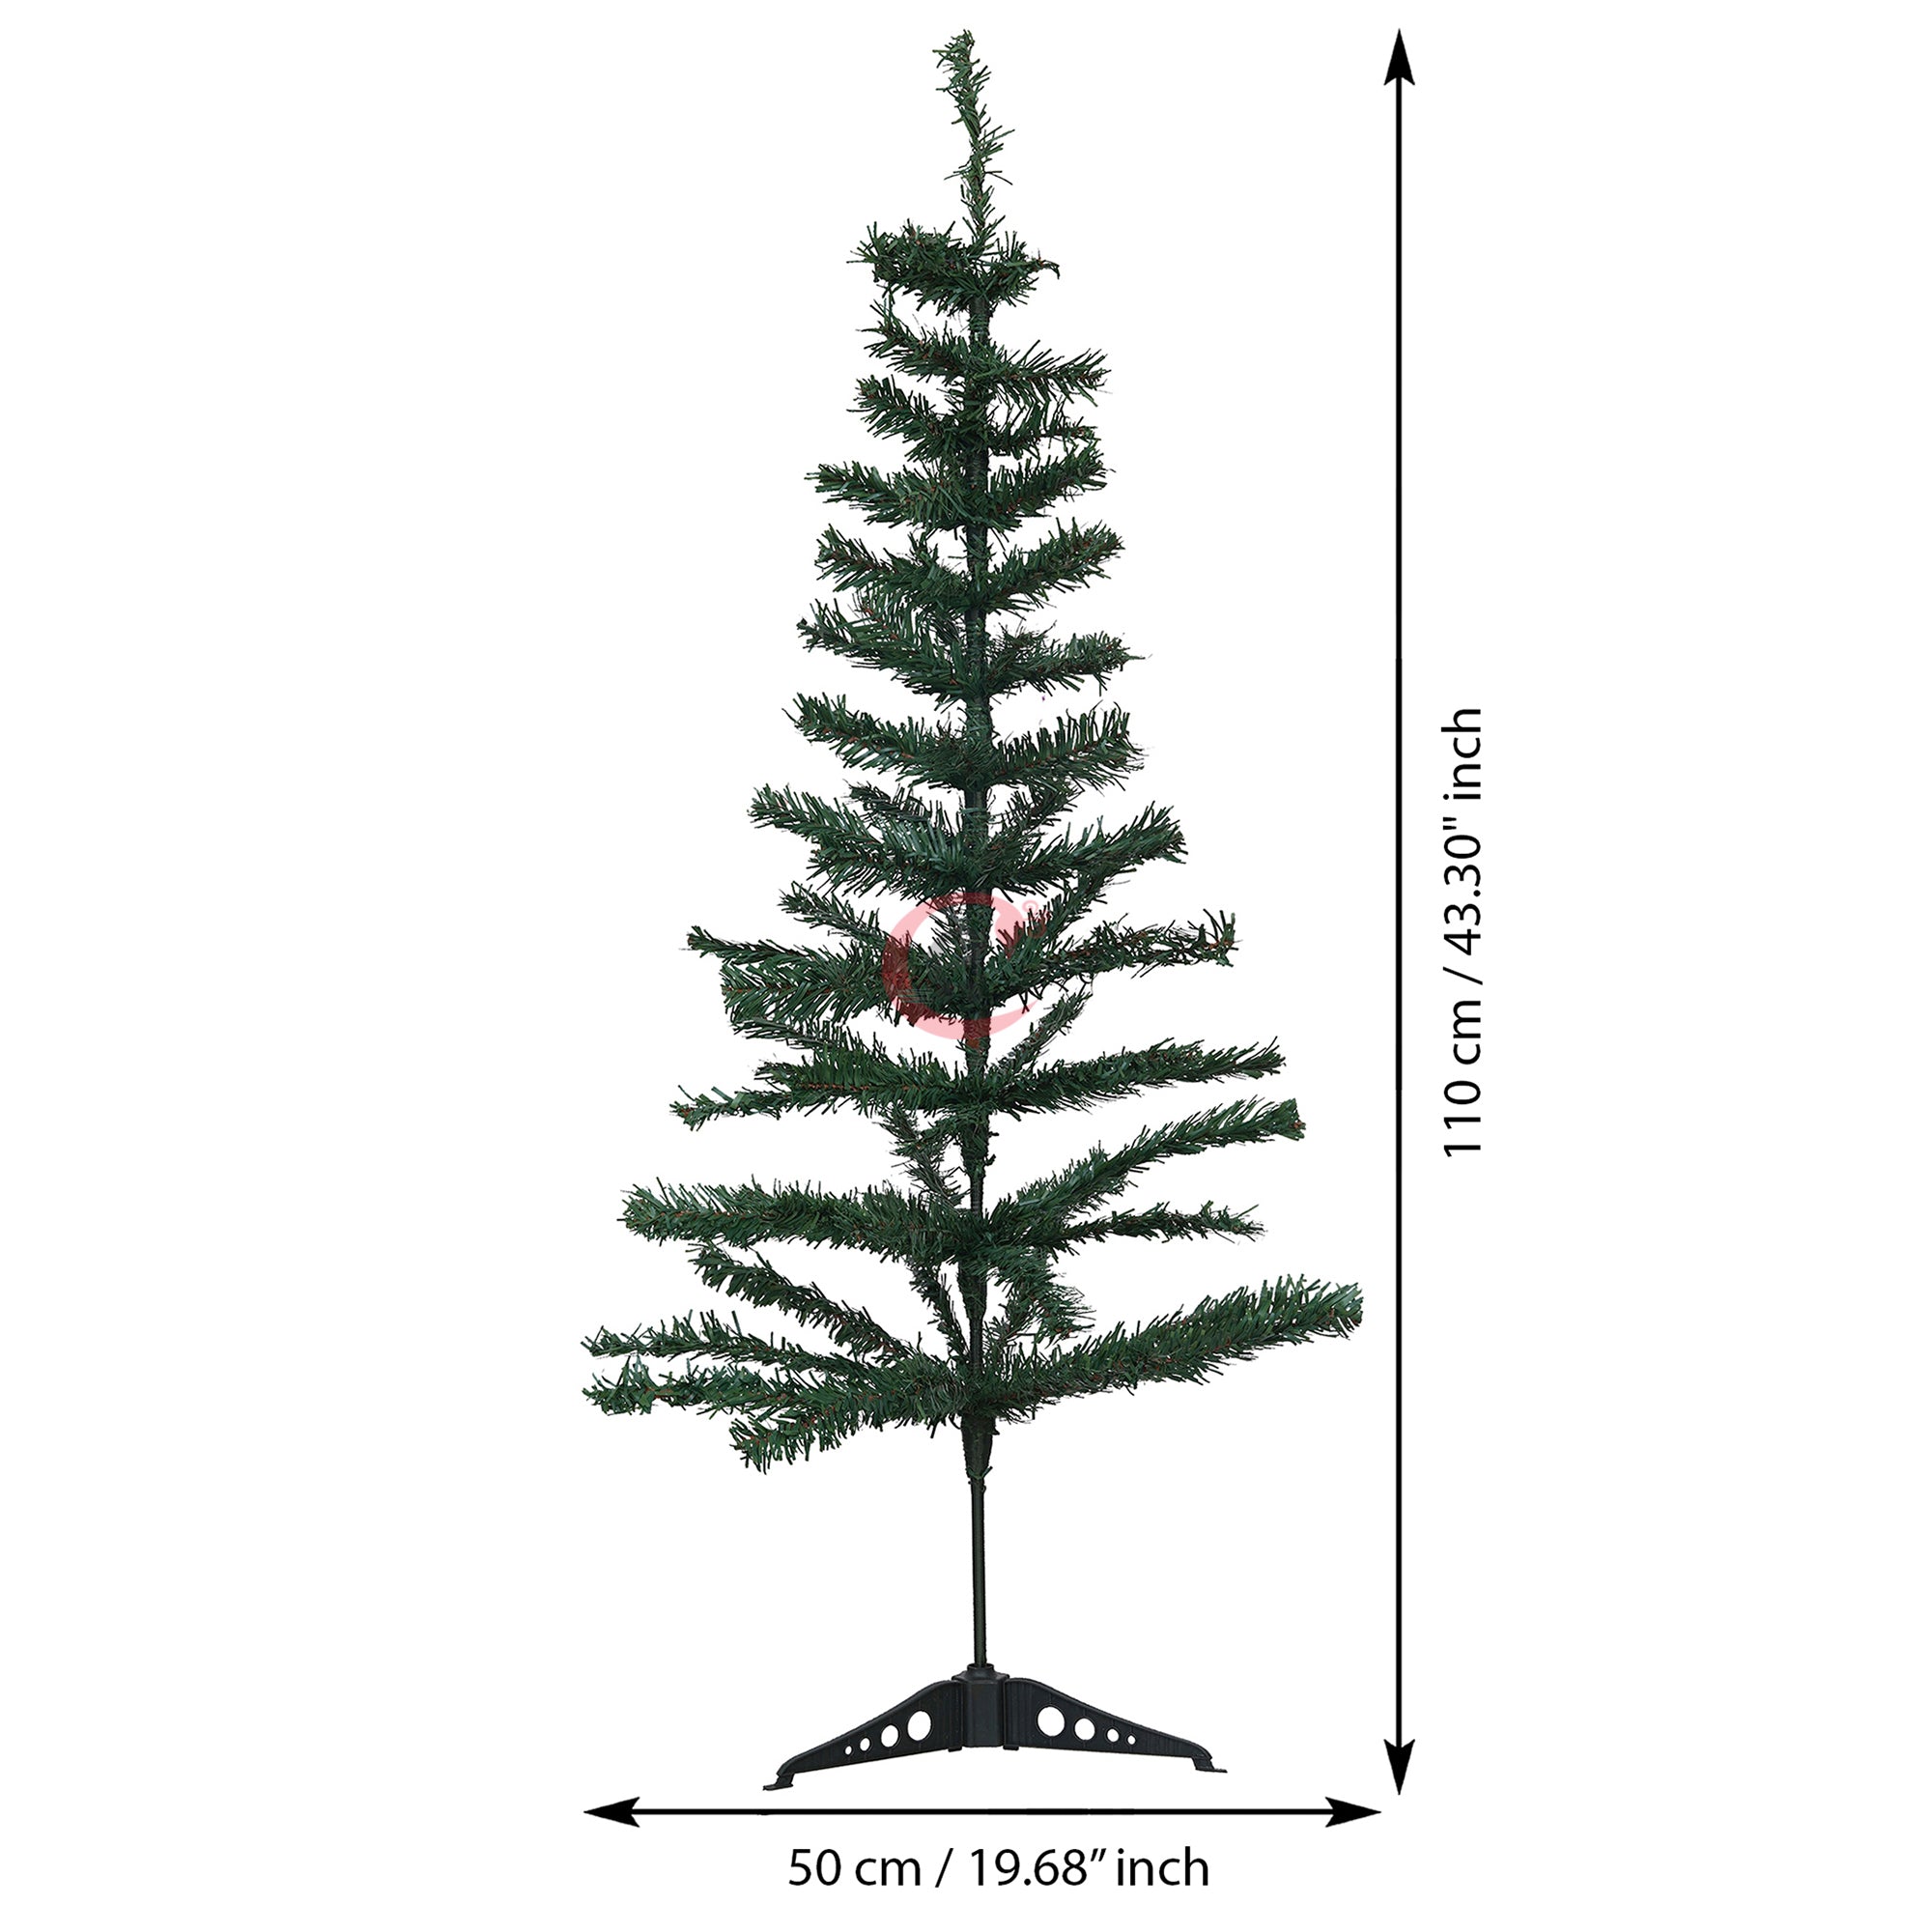 eCraftIndia 4 Feet Green Artificial Christmas Tree Xmas Pine Tree with Stand and 60 Christmas Decoration Ornaments Props - Merry Christmas Decoration Item for Home, Office, and Church 3